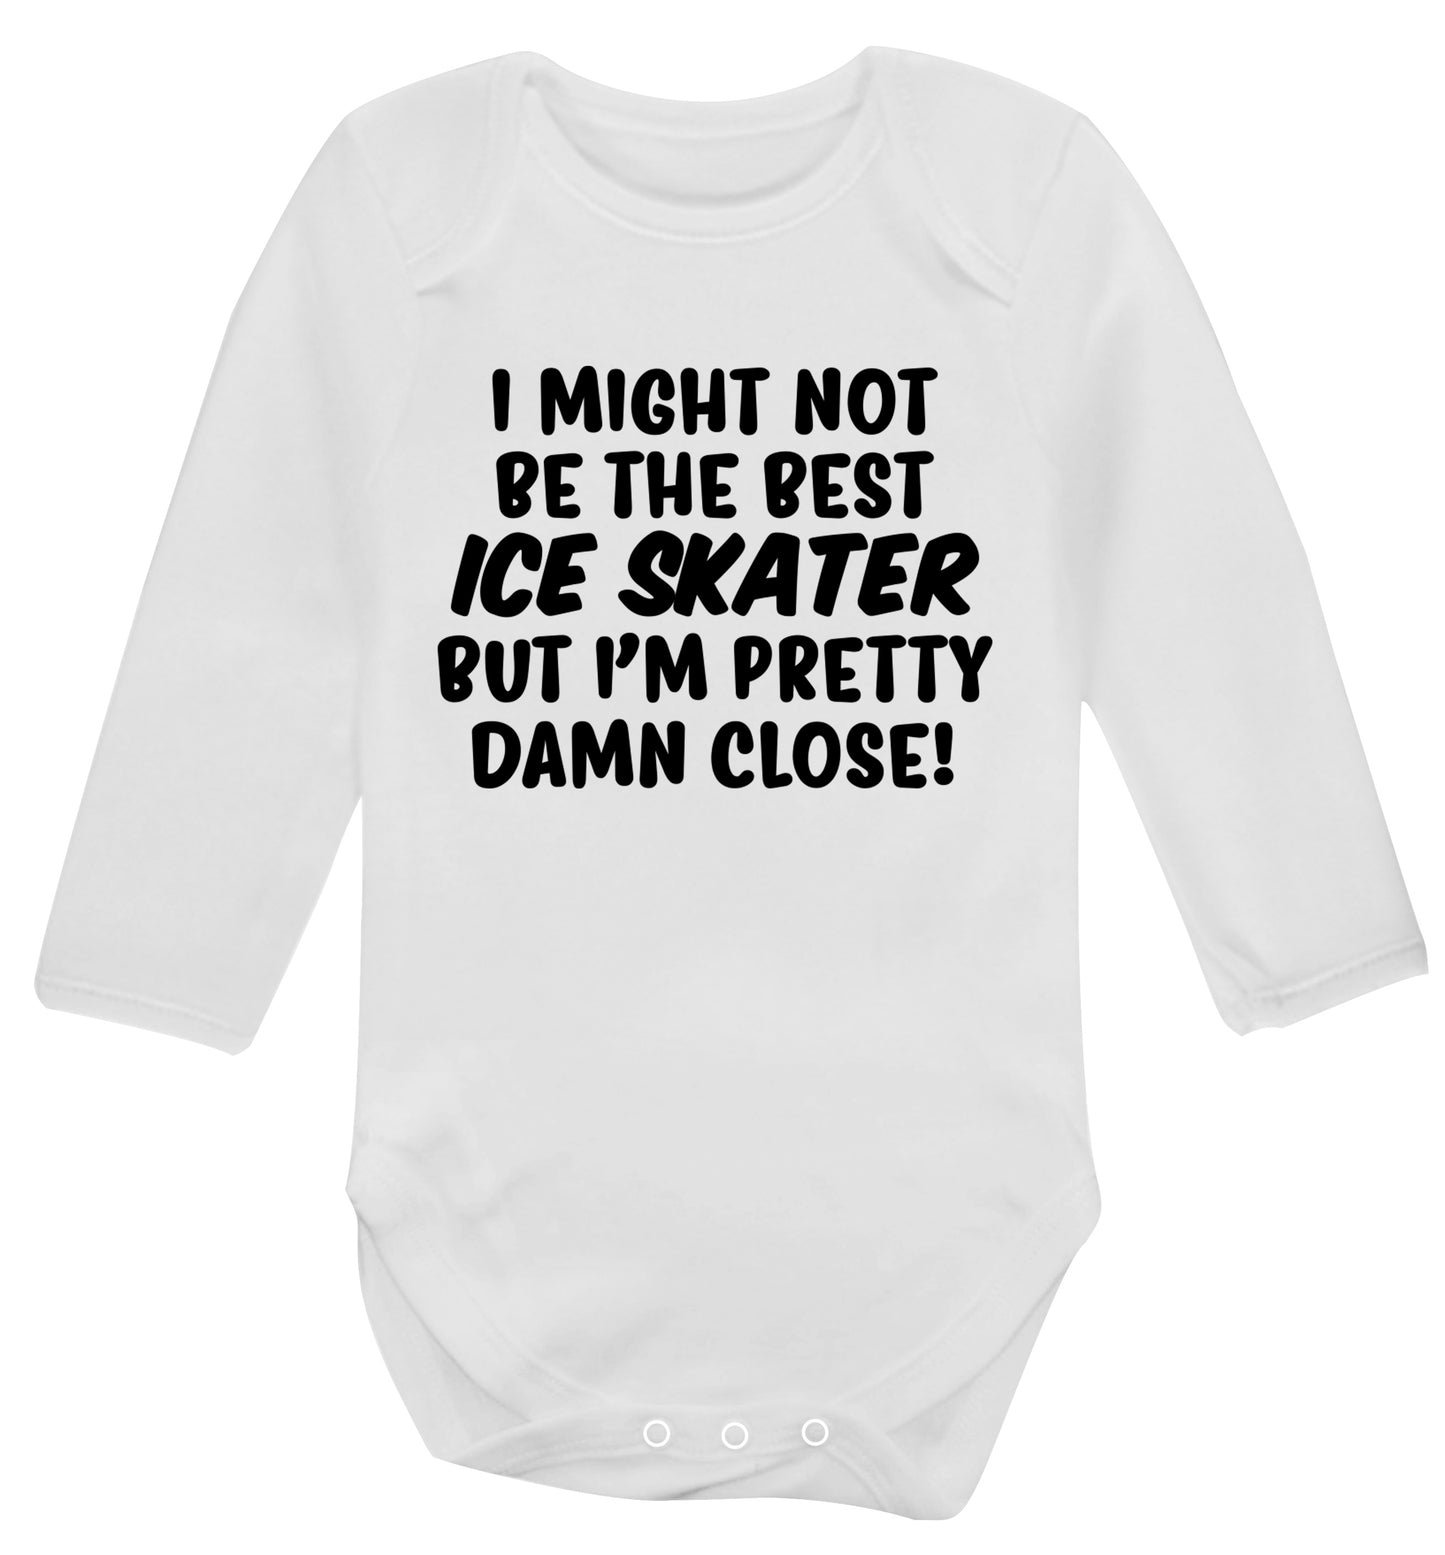 I might not be the best ice skater but I'm pretty damn close! Baby Vest long sleeved white 6-12 months